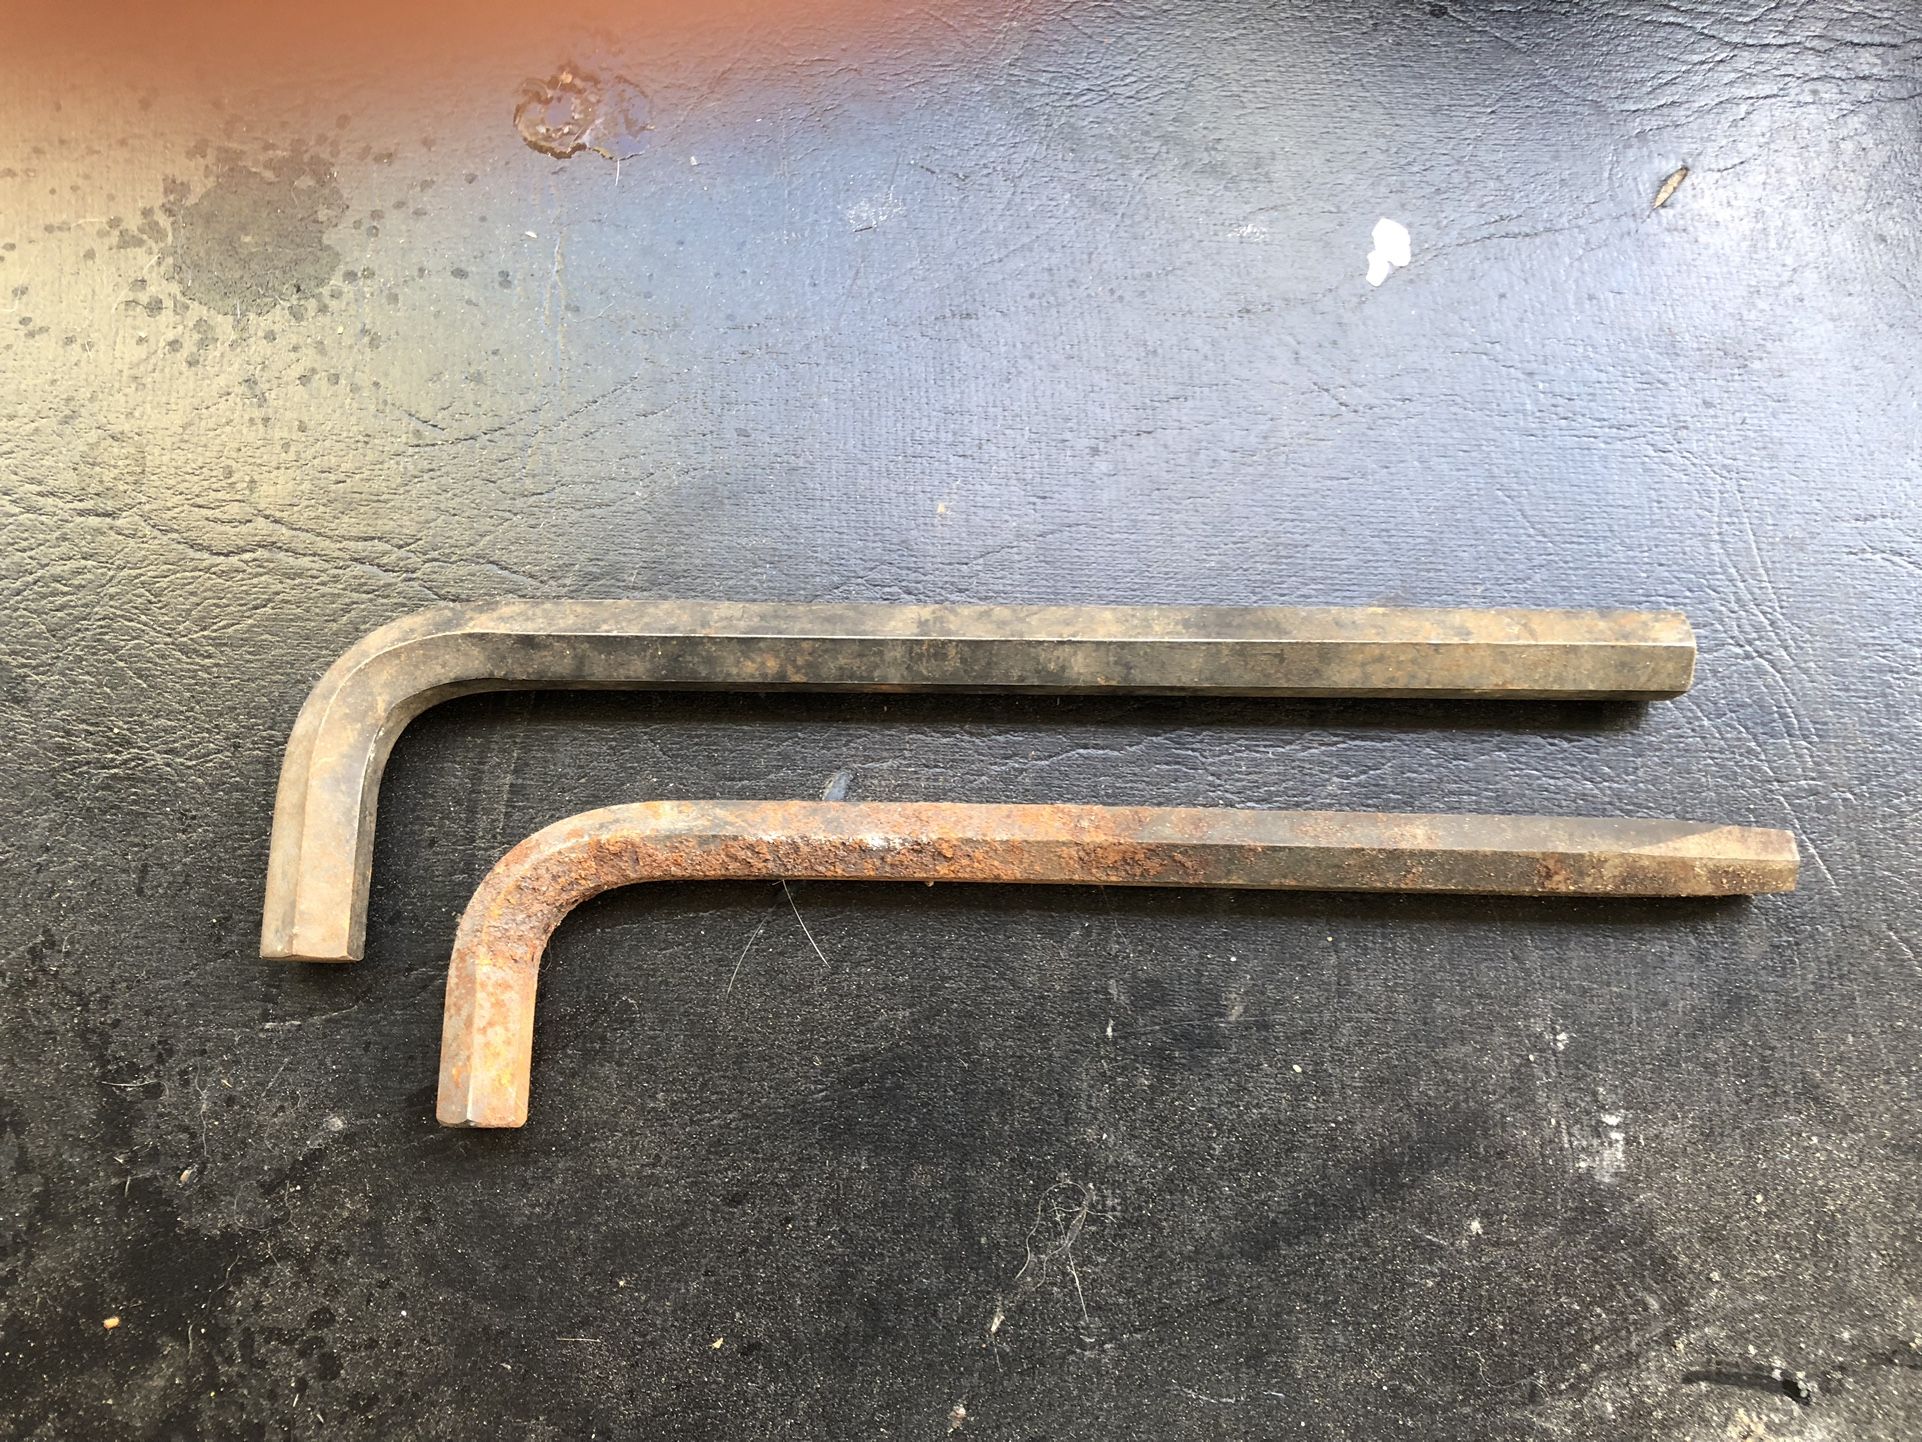 2 BIG ALLEN WRENCHES 